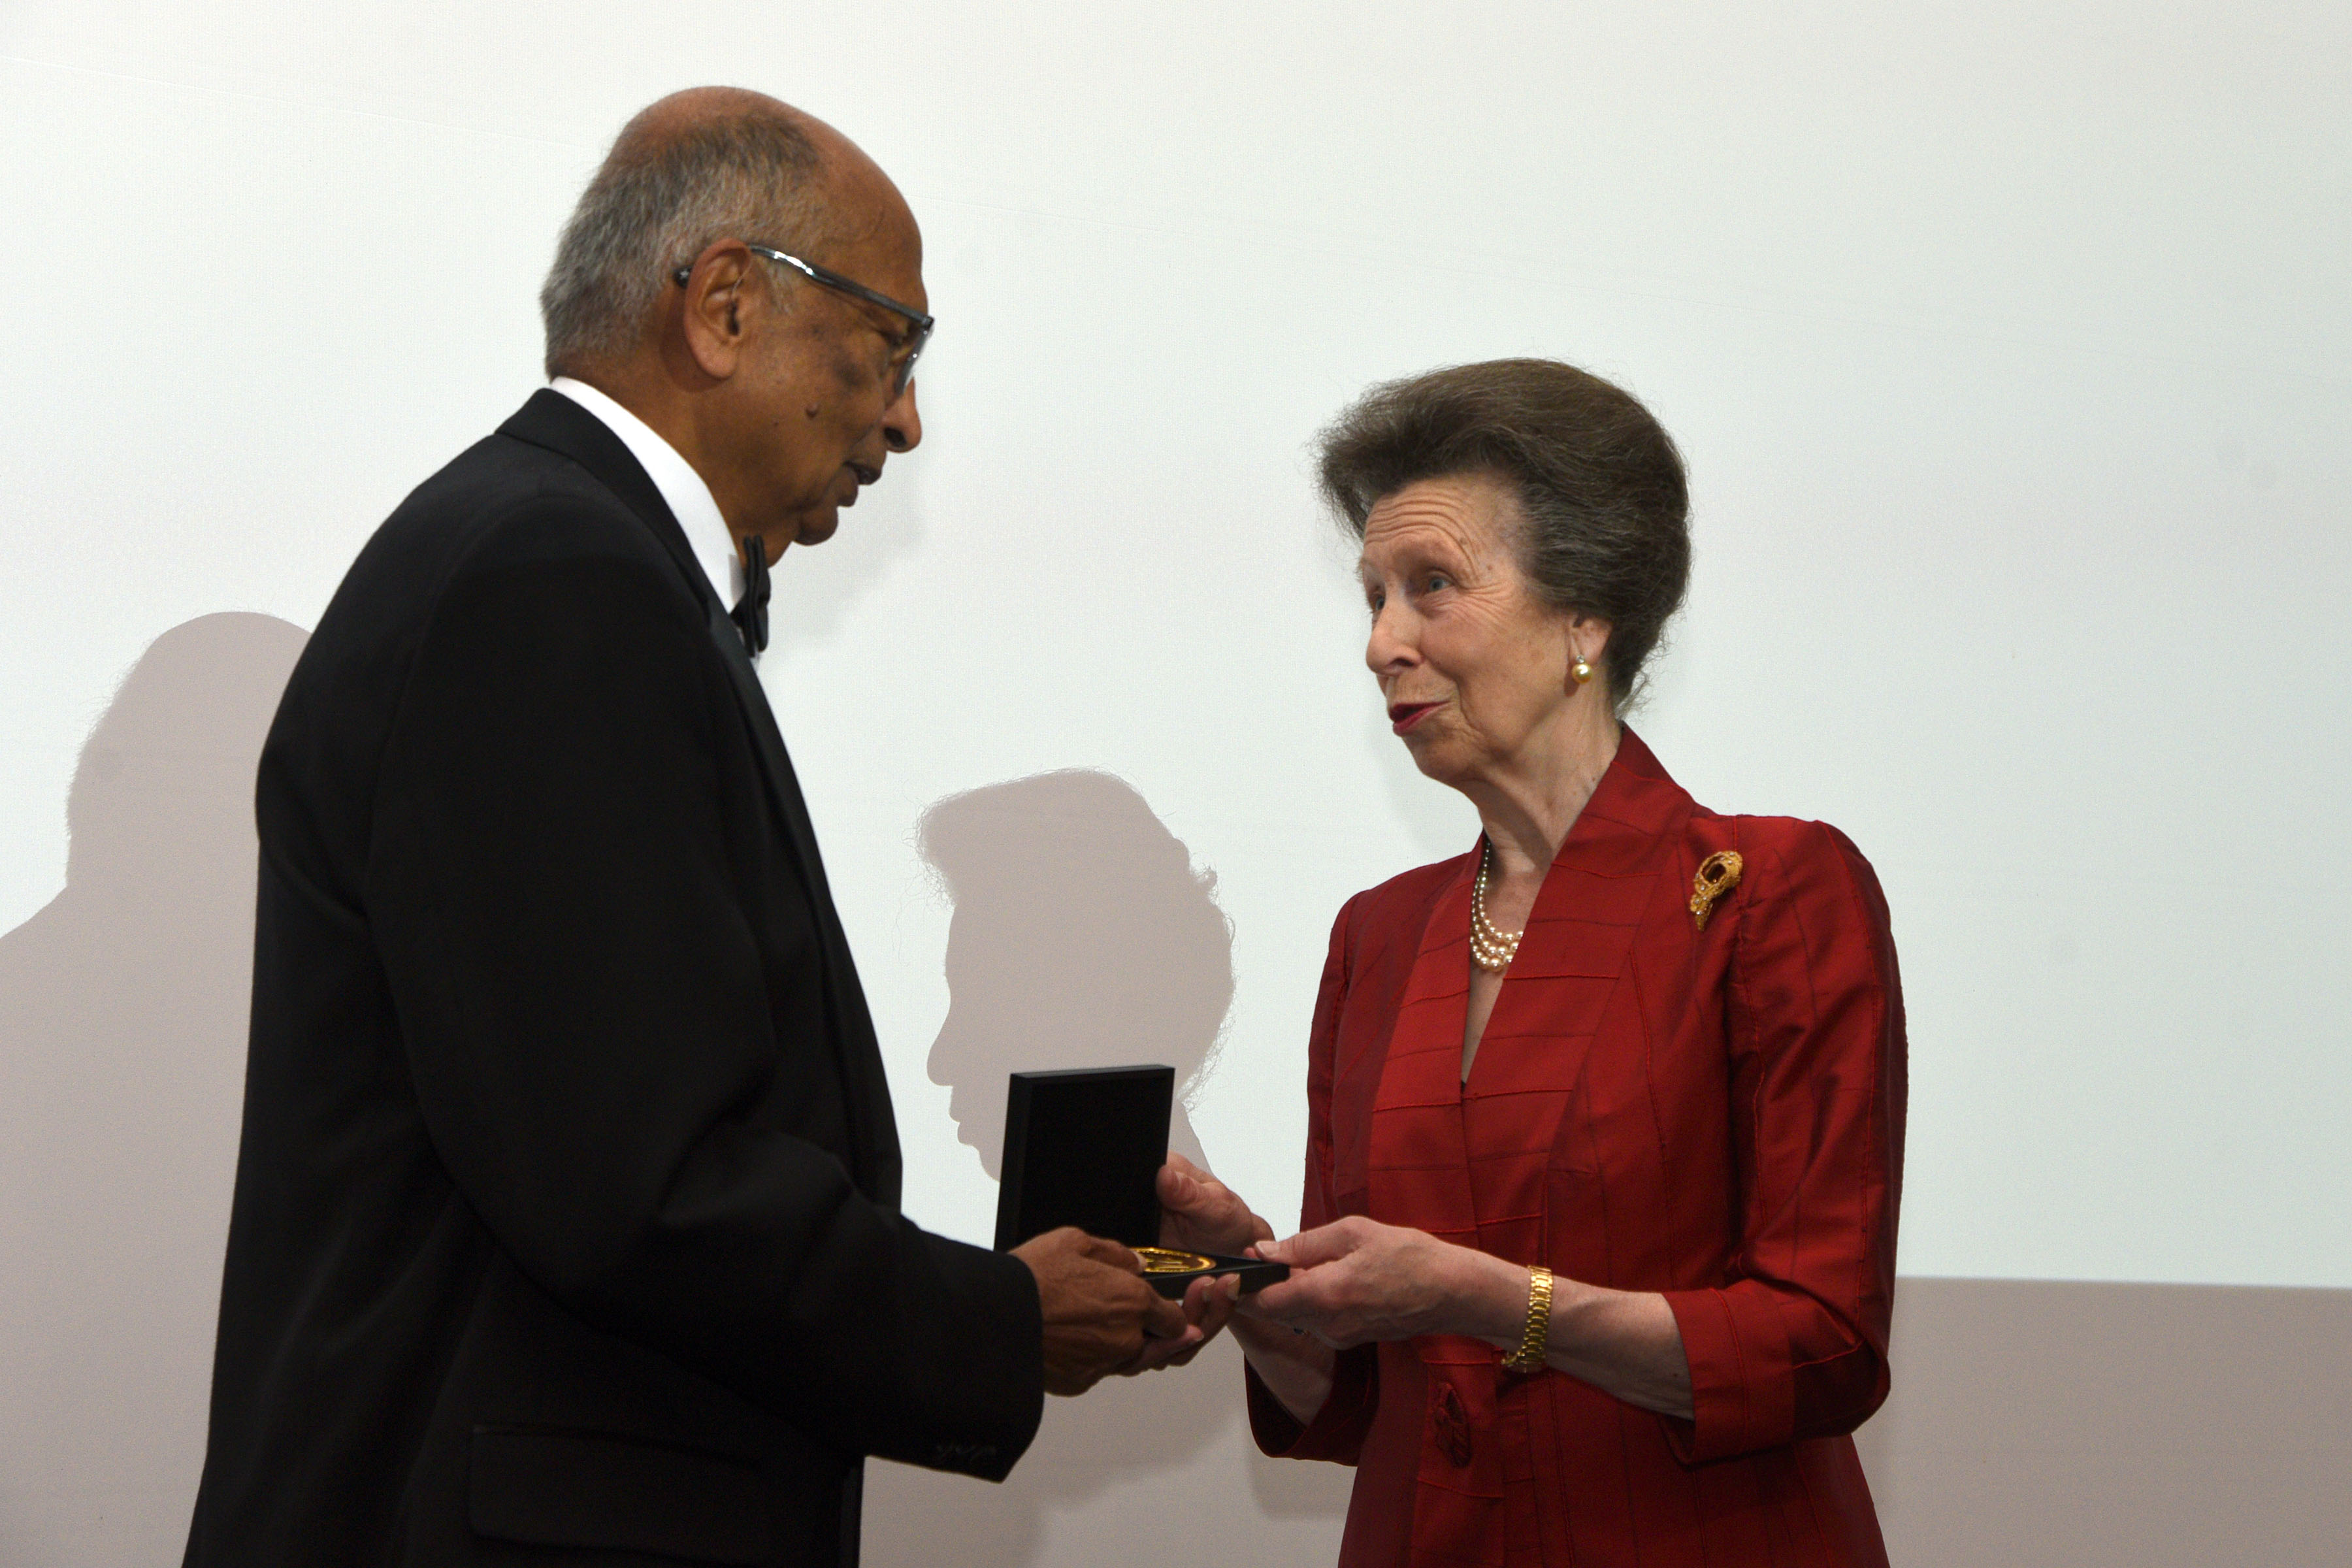 Dr Arogyaswami J Paulraj being presented with the Prince Philip Medal by HRH The Princess Royal